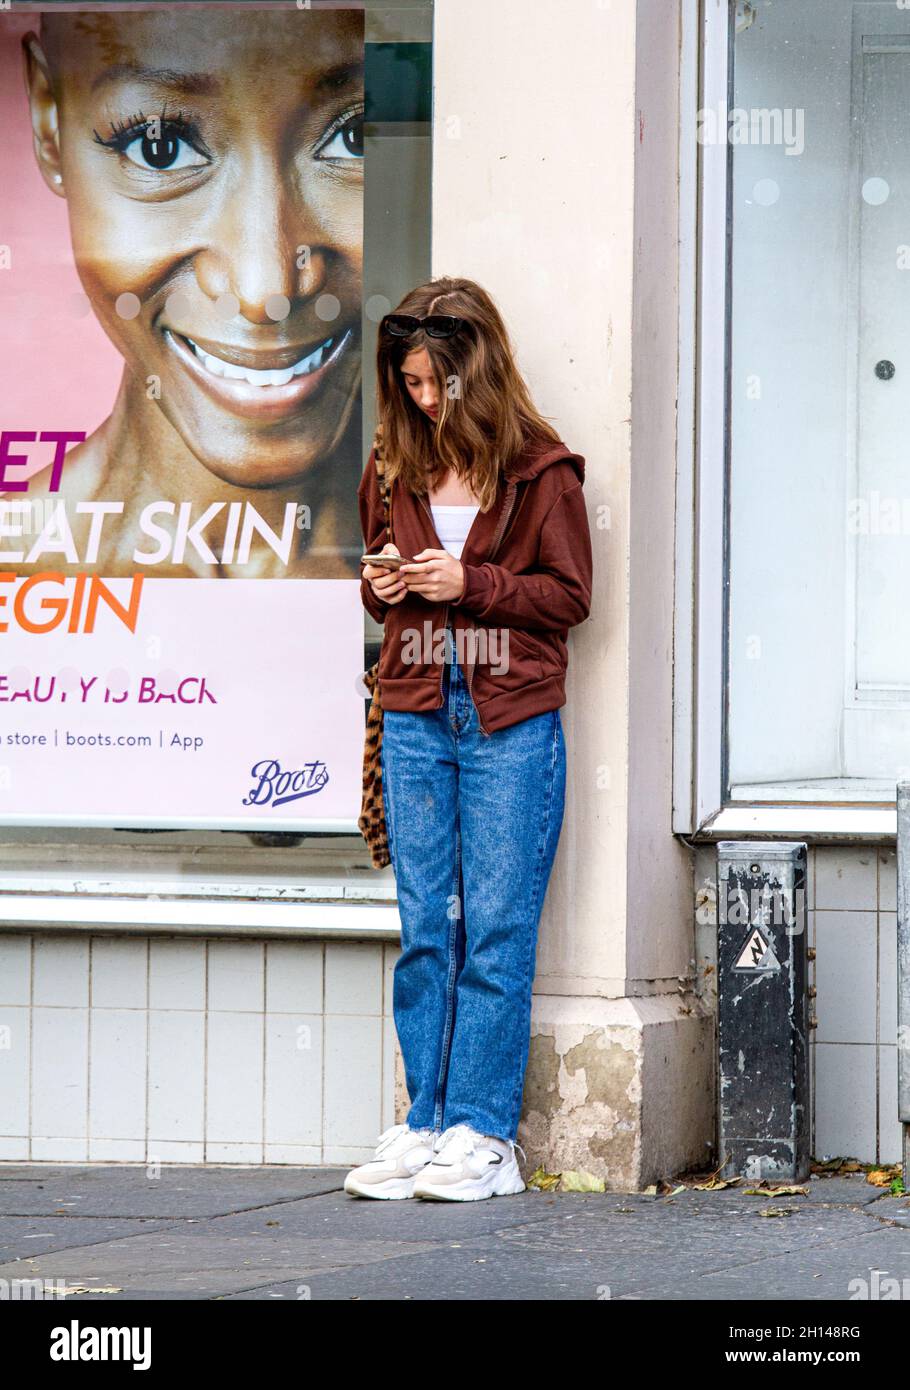 Dundee, Tayside, Scotland, UK. 16th Oct, 2021. UK Weather: A quite cool and bright Autumn day with sunny spells across North East Scotland, temperatures reaching 10°C. An attractive young woman is spending the day out enjoying the cool bright Autumn weather texting messages on her mobile phone whilst shopping in Dundee city centre. Credit: Dundee Photographics/Alamy Live News Stock Photo